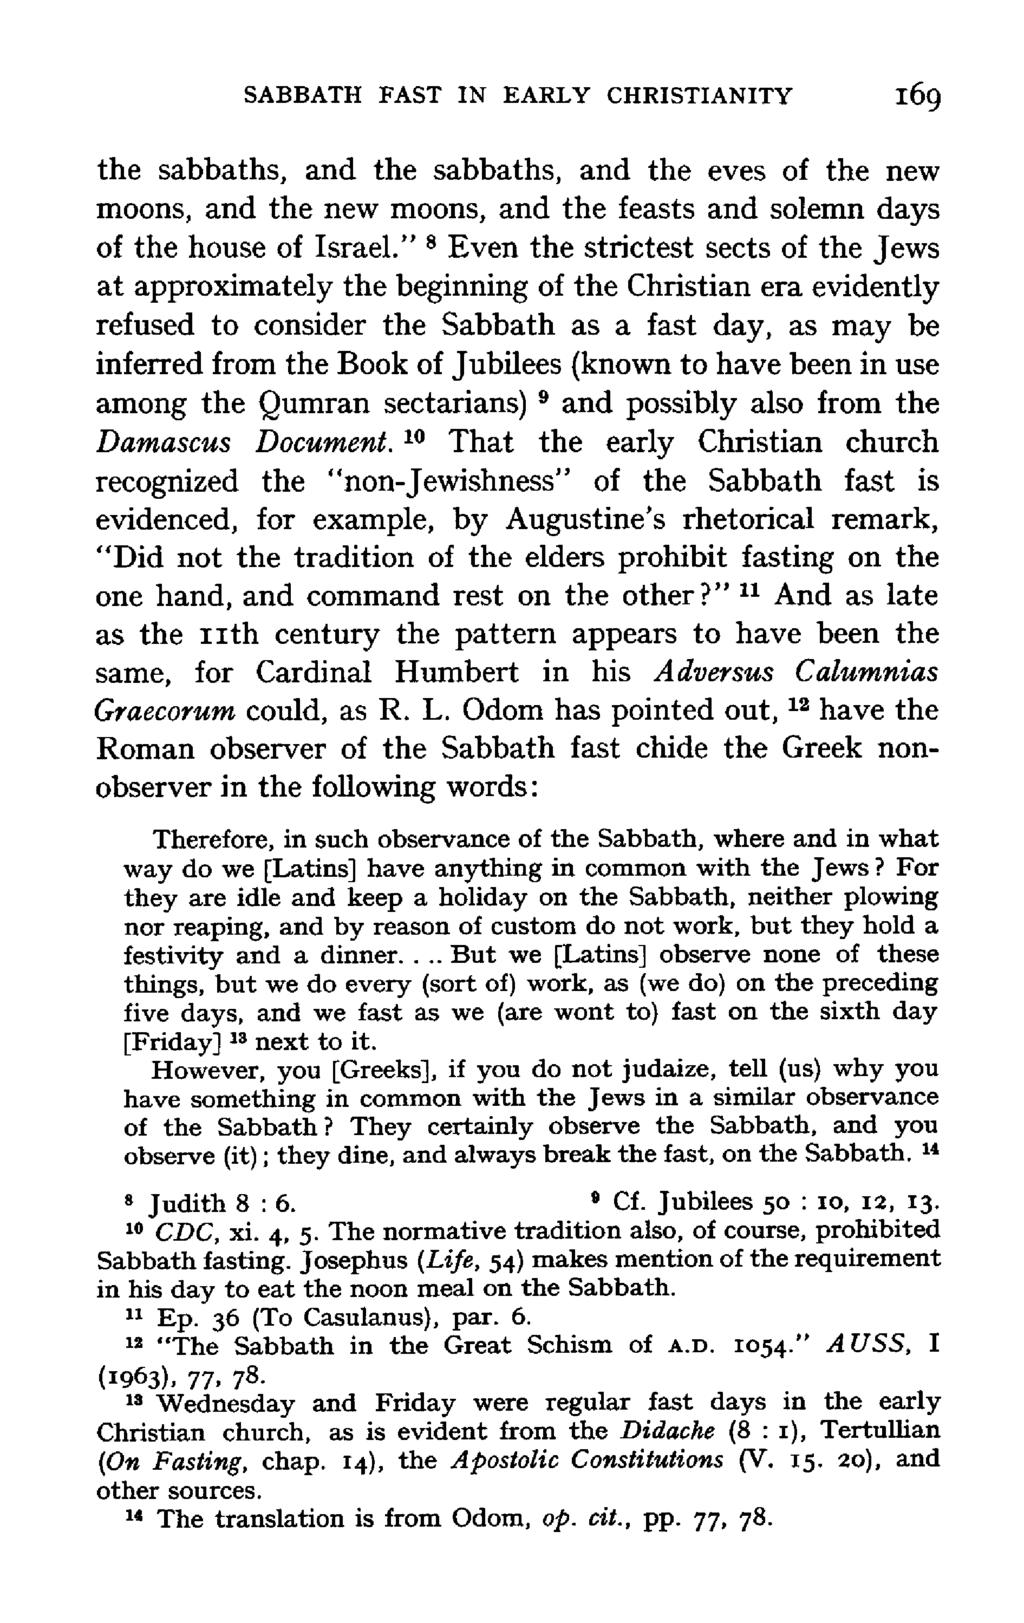 SABBATH FAST IN EARLY CHRISTIANITY 169 the sabbaths, and the sabbaths, and the eves of the new moons, and the new moons, and the feasts and solemn days of the house of Israel.